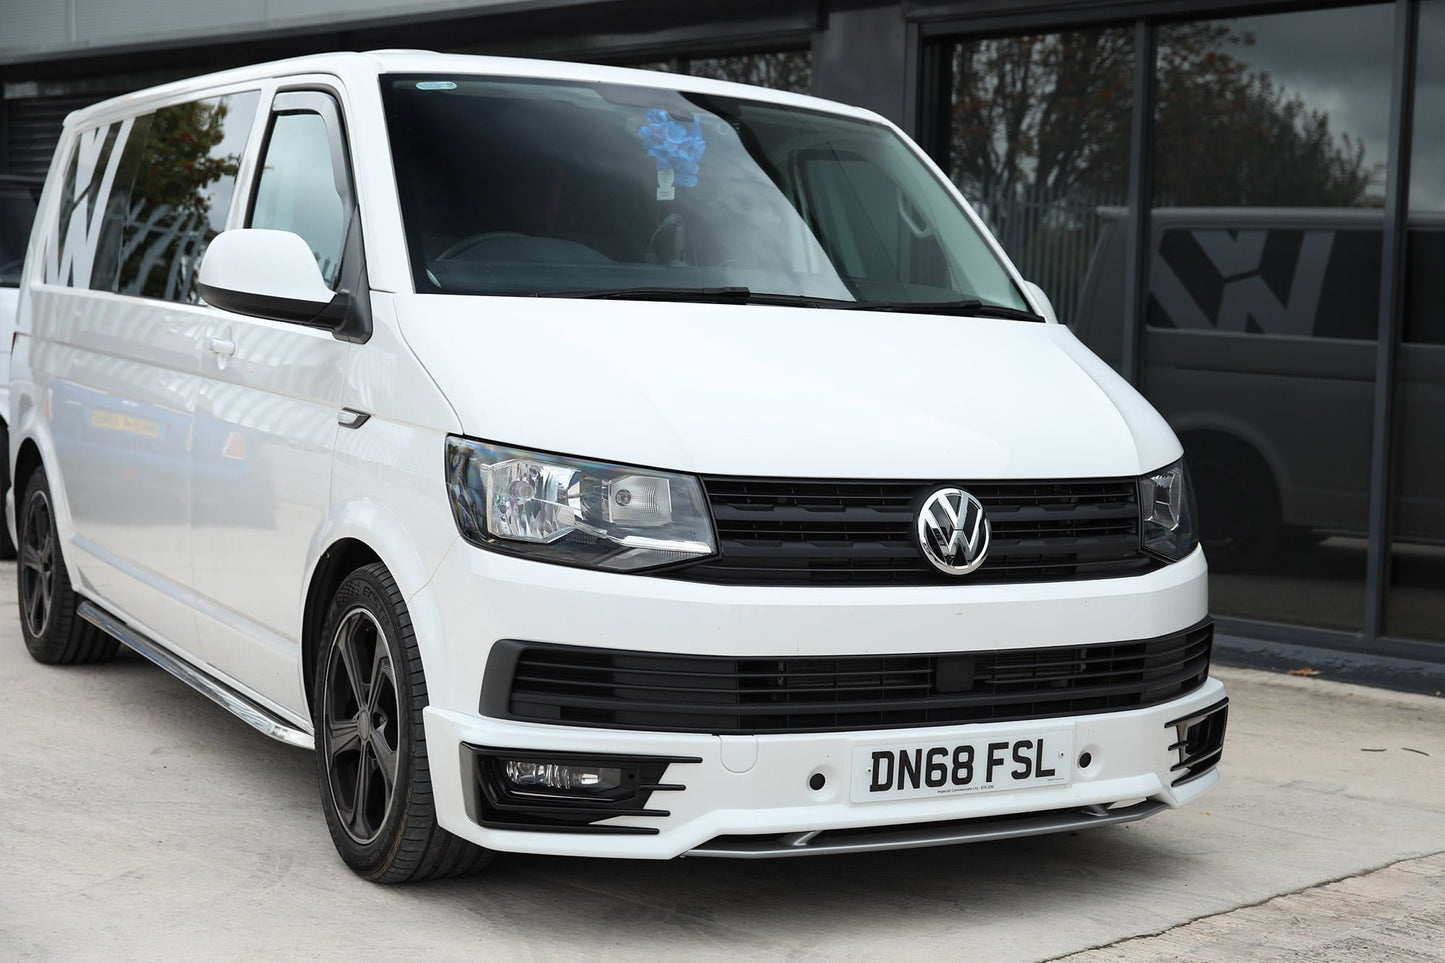 VW Transporter T6 R-Line Front Grille Trims - Matte Black Painted and Ready to Fit